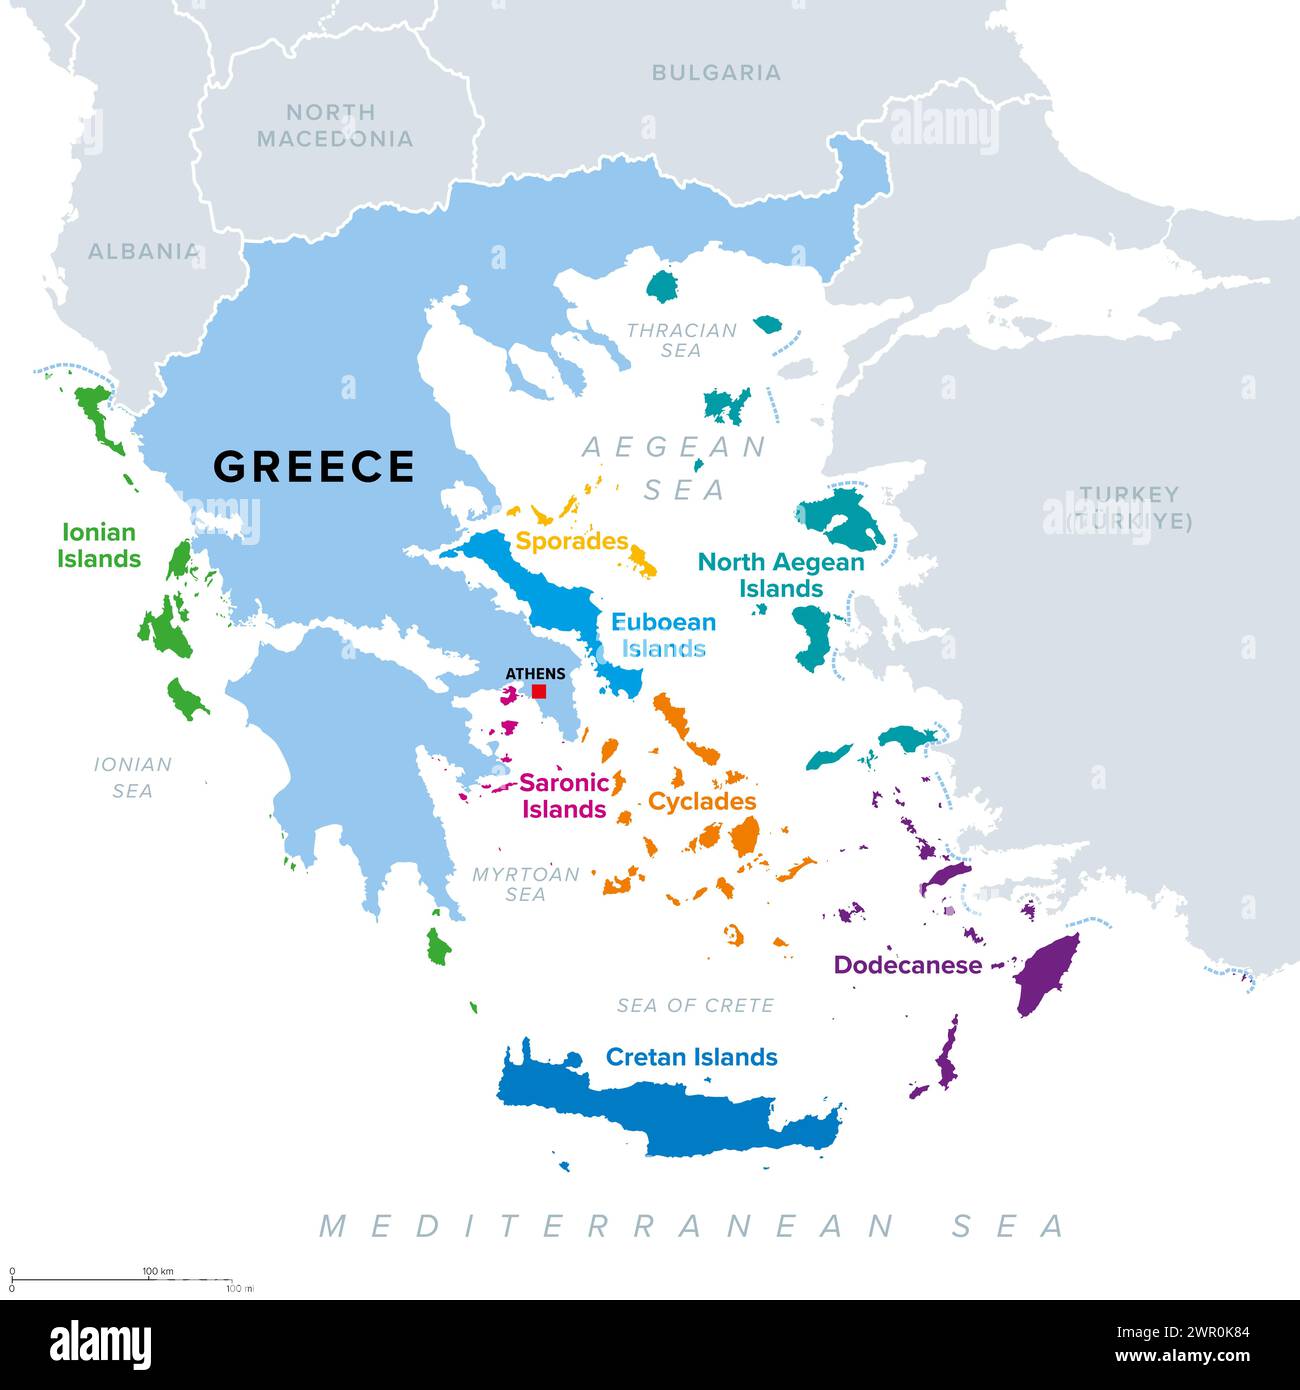 Greek island groups, islands of Greece, political map. The greek islands are traditionally grouped into clusters, most of them lying in the Aegean Sea. Stock Photo